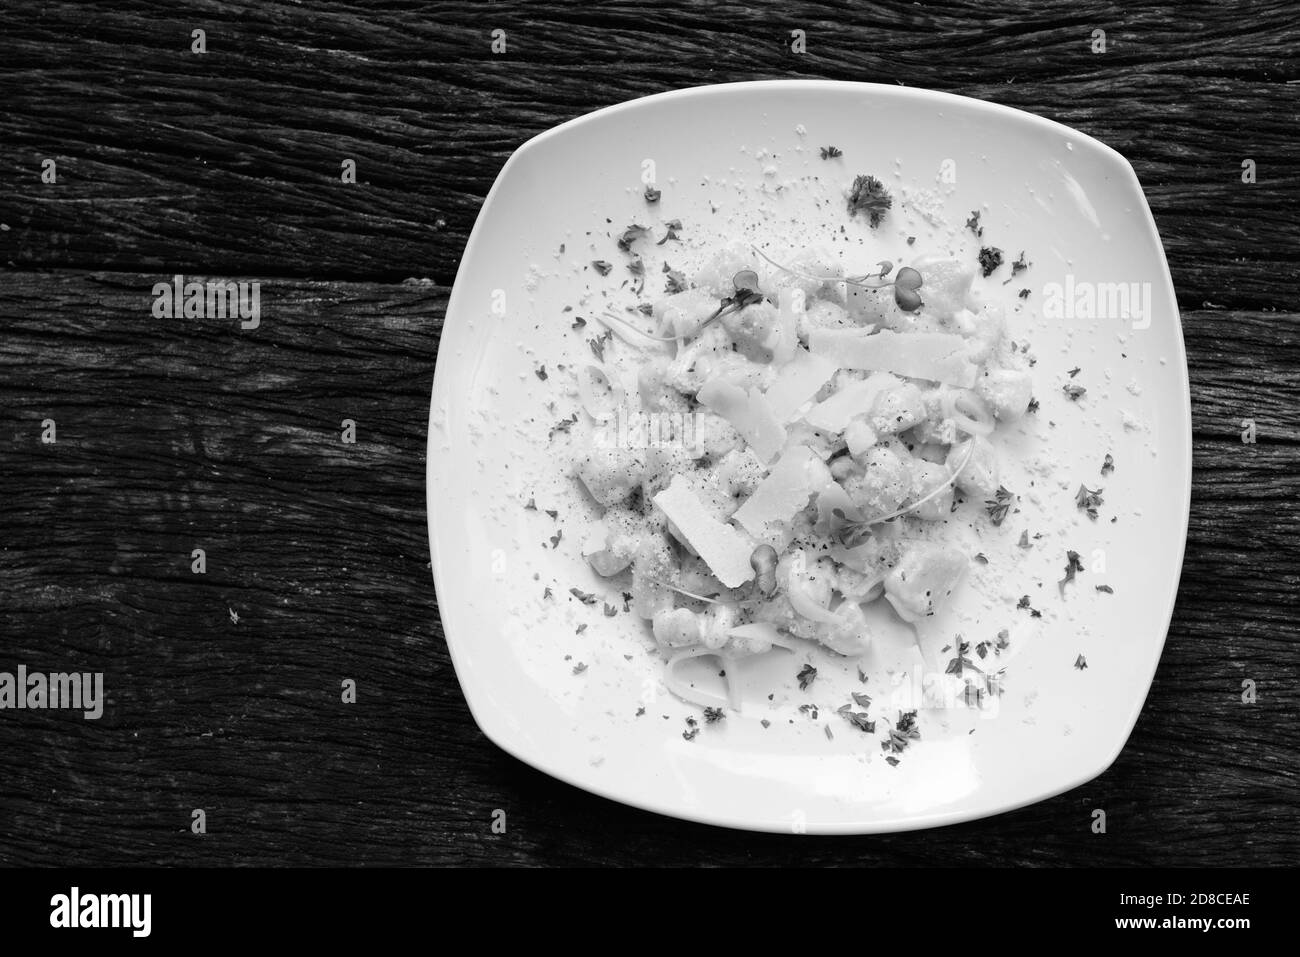 Gnocchi Mixed with Cheese And Cream Against Wooden Table Stock Photo